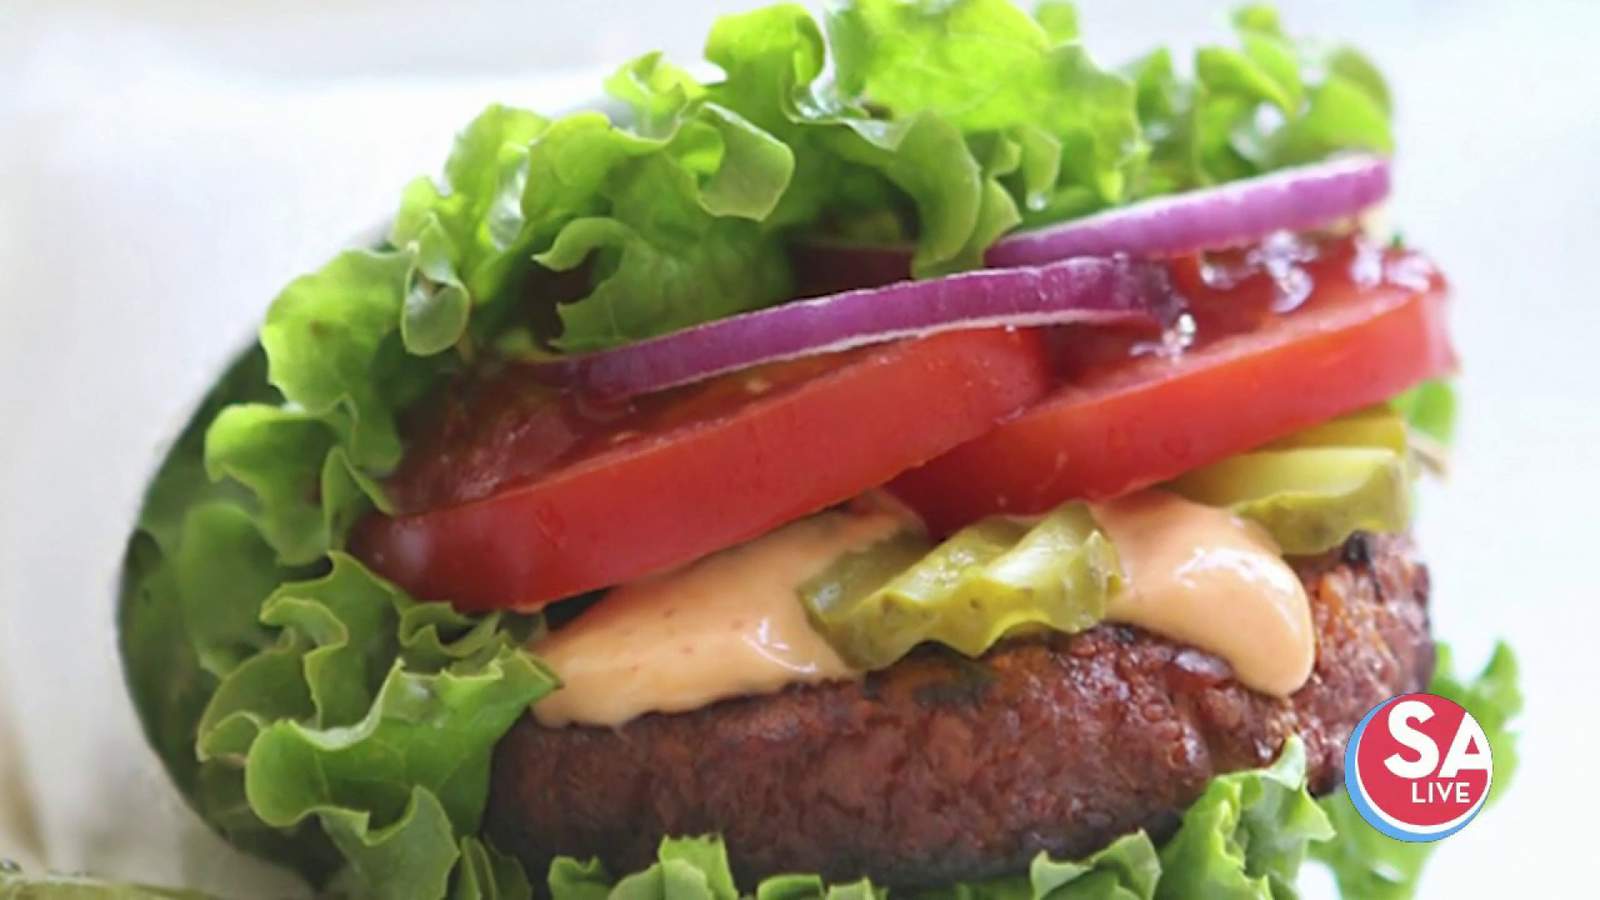 How to grill plant-based burgers